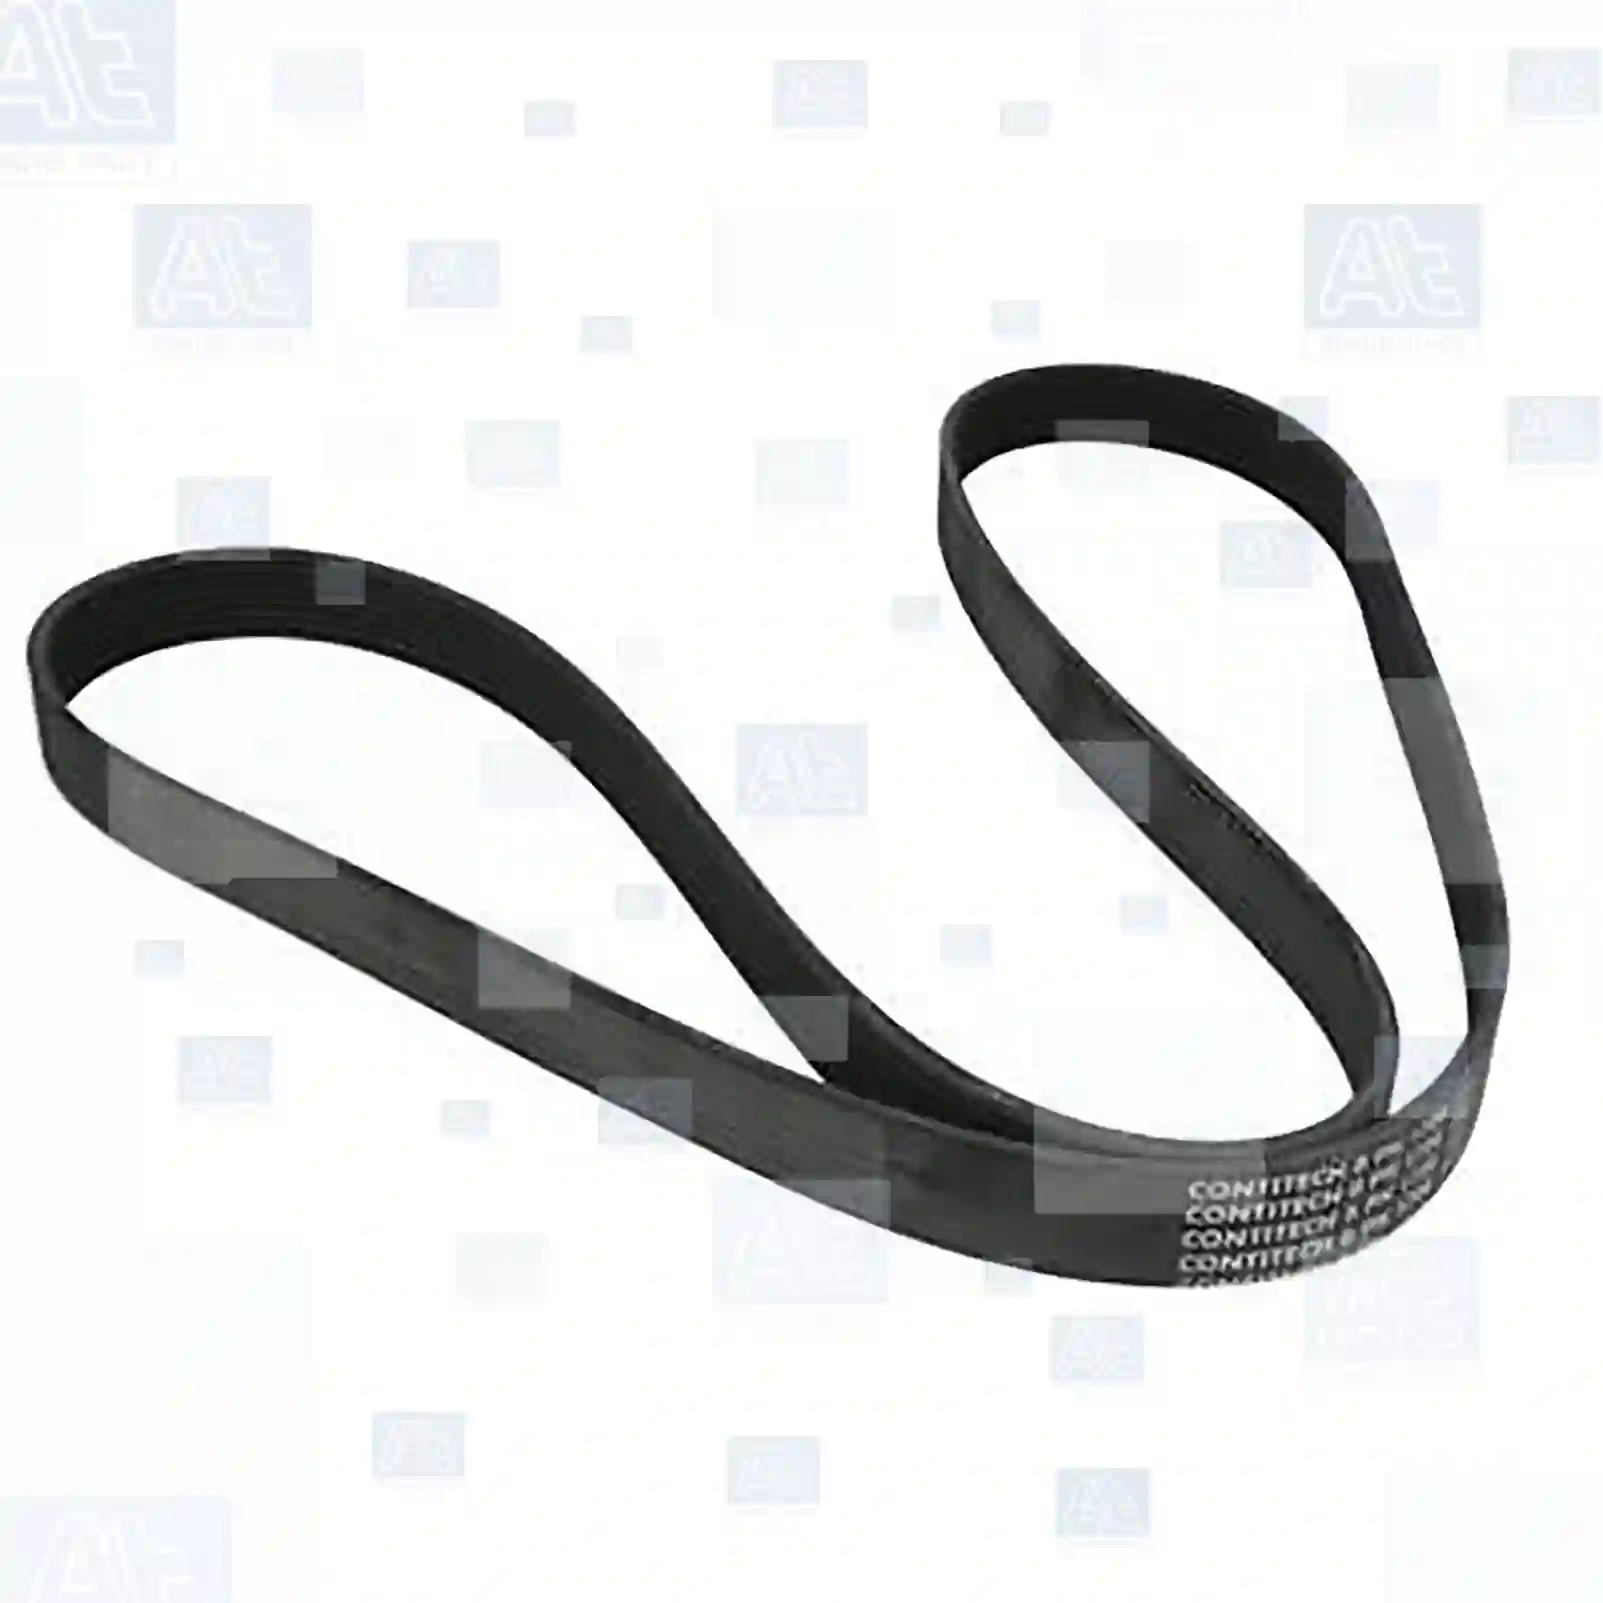 V-Belt / Timing belt Multiribbed belt, at no: 77708449 ,  oem no:46444537, 46769821, 46787906, 51855784, 55186364, 55189684, 55201362, 60813720, 71734715, 71734716, 71739910, 71749452, 037145933A, 037145933C, 047903137AB, 074145933AR, 078903137AP, 078903137BH, 078903137BM, 6Q0260849C, PQS10061, 11287794248, 4892519AB, 53010010, 5750GF, 5750GK, 5750GL, 5750HG, 5750HH, 5750R9, 5750S0, 5750T7, 5750T8, 5750VS, 5750VX, 5750X3, 5750XS, 9633010980, 9642574680, 9644351580, 9652258880, 9652746780, 4891974AC, 07310606, 55189686, 71734716, 71739923, 71739924, 71749452, 9629054080, 9638464180, 9638464380, 9644846680, 96225213, 96242337, 96284665, 96290540, 96313338, 96324103, 96324104, 1007485, 1011193, 1036917, 1427353, 1494787, 92062955, 37330-29100, 37330-29102, 4891974AC, 4892519AA, 53010010, 53010283, 07310606, 46444537, 46479557, 46769821, 46787907, 60816660, 71734716, 71749452, 9629054080, 9630796180, 9631333880, 9632410380, 9638464380, 9644846680, 96188881, 96324103, GFB101750, LR000996, PQS10061, 1E0315907, 1E0315907A, 1E0315907B, 1E0515907, 96FB6C301BC, 96MF6C301BC, 4451A060, 5750GF, 5750GK, 5750GL, 5750HG, 5750HH, 5750R9, 5750S0, 5750T7, 5750T8, 5750VS, 5750VX, 5750X3, 5750XS, 9633010980, 9642574680, 9644351580, 9652258880, 9652746780, 0000107175, 5000679653, 5000693140, PQS10061, 047903137AB, 074145933AR, 6Q0260849A, 03D145933A, 047903137AB, 074145933AR, 6Q0260849A, 6Q0260849C, 49180-65G10, 91829229, 9186352, 9434341, 037145933A, 037145933C, 03D145933A, 047903137AB, 074145933AD, 074145933AR, 6Q0260849, 74145933AD, 74145933AR, 78903137AP At Spare Part | Engine, Accelerator Pedal, Camshaft, Connecting Rod, Crankcase, Crankshaft, Cylinder Head, Engine Suspension Mountings, Exhaust Manifold, Exhaust Gas Recirculation, Filter Kits, Flywheel Housing, General Overhaul Kits, Engine, Intake Manifold, Oil Cleaner, Oil Cooler, Oil Filter, Oil Pump, Oil Sump, Piston & Liner, Sensor & Switch, Timing Case, Turbocharger, Cooling System, Belt Tensioner, Coolant Filter, Coolant Pipe, Corrosion Prevention Agent, Drive, Expansion Tank, Fan, Intercooler, Monitors & Gauges, Radiator, Thermostat, V-Belt / Timing belt, Water Pump, Fuel System, Electronical Injector Unit, Feed Pump, Fuel Filter, cpl., Fuel Gauge Sender,  Fuel Line, Fuel Pump, Fuel Tank, Injection Line Kit, Injection Pump, Exhaust System, Clutch & Pedal, Gearbox, Propeller Shaft, Axles, Brake System, Hubs & Wheels, Suspension, Leaf Spring, Universal Parts / Accessories, Steering, Electrical System, Cabin